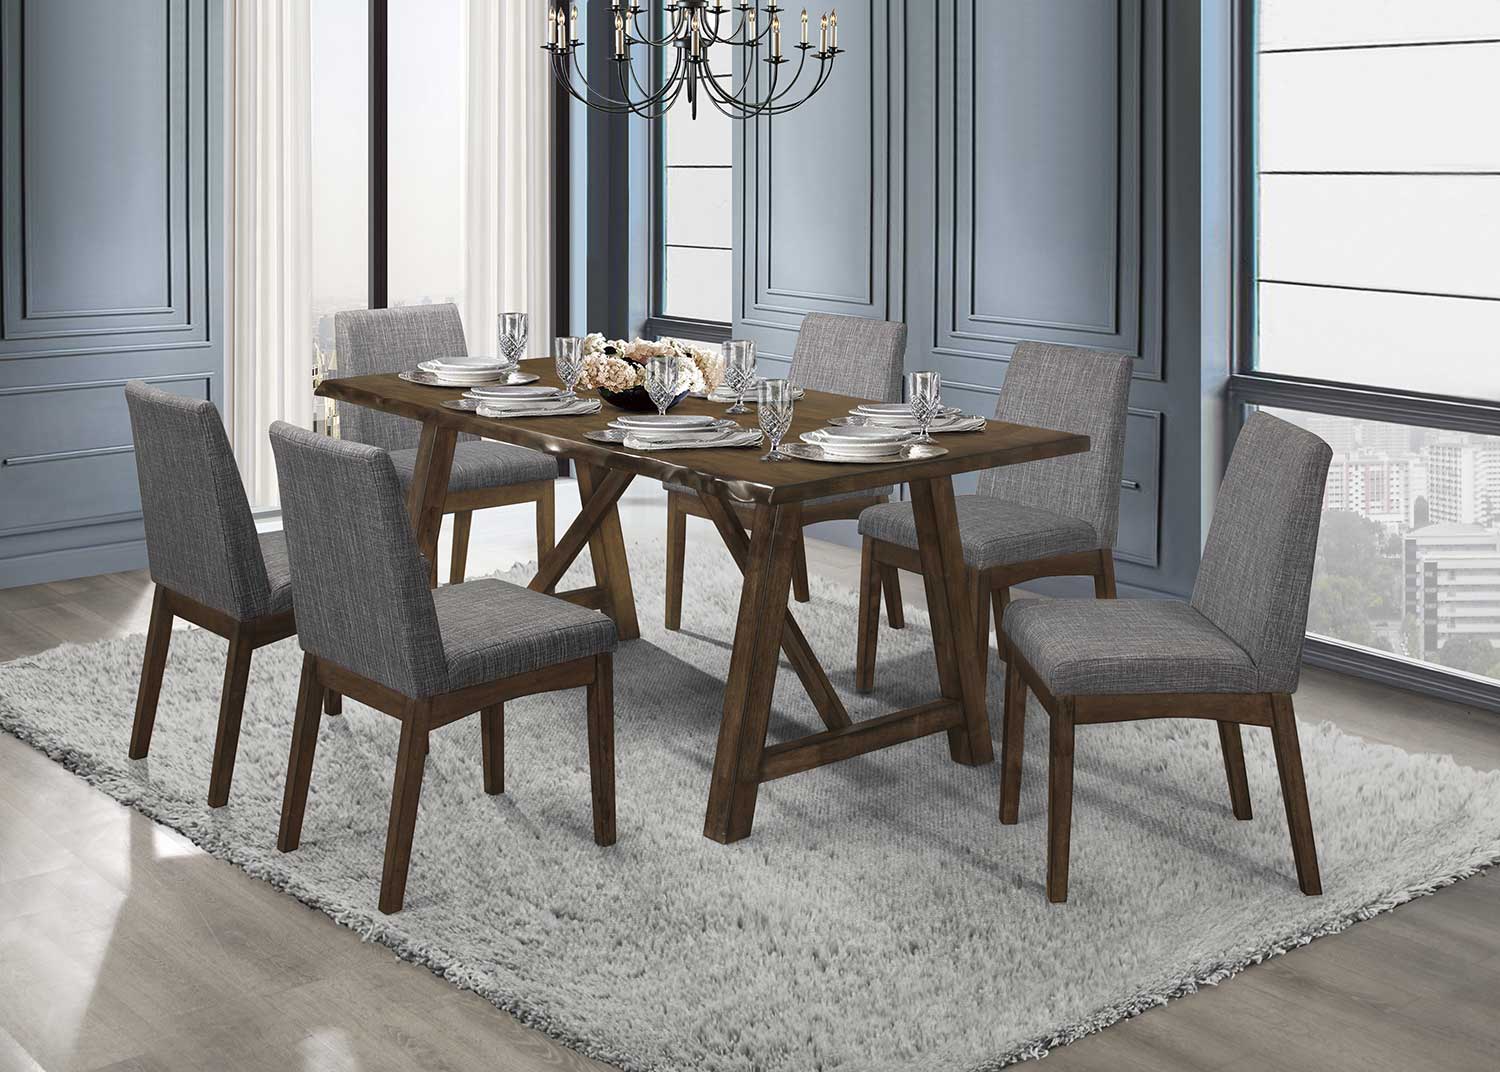 Homelegance Whittaker Dining Set - Warm Brown and Black